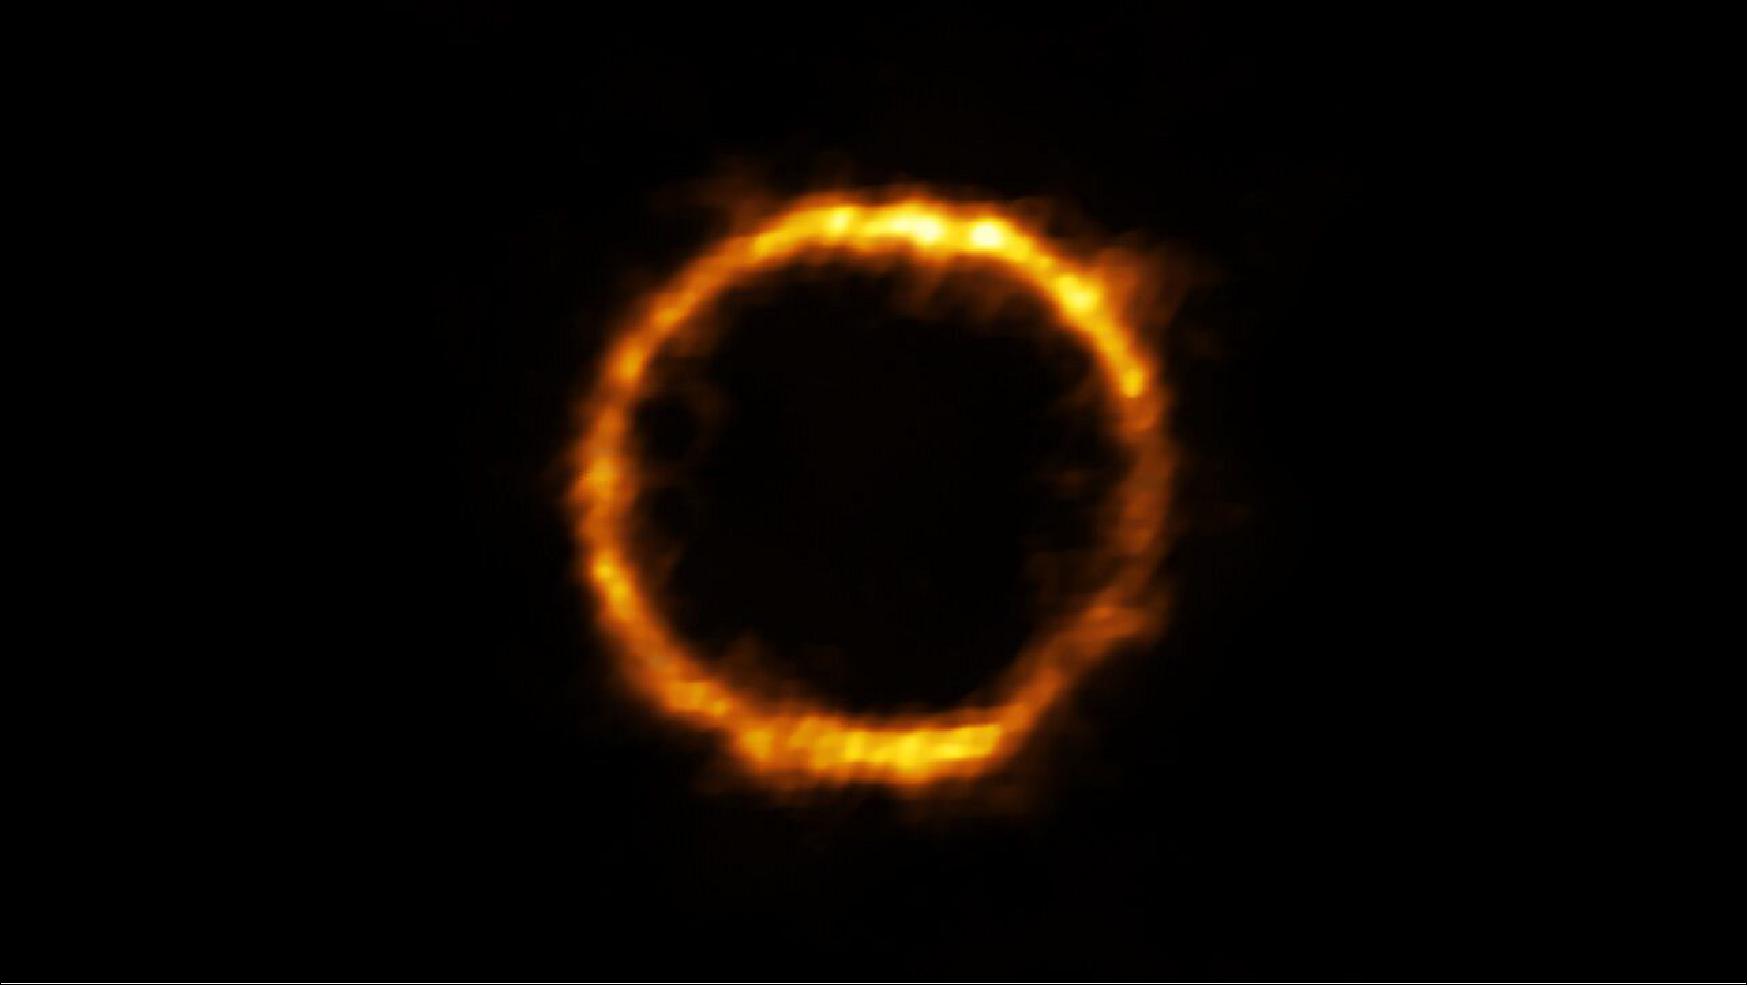 Figure 53: Astronomers using ALMA, in which the ESO is a partner, have revealed an extremely distant galaxy that looks surprisingly like our Milky Way. The galaxy, SPT0418-47, is gravitationally lensed by a nearby galaxy, appearing in the sky as a near-perfect ring of light (image credit: ALMA (ESO/NAOJ/NRAO), Rizzo et al.)